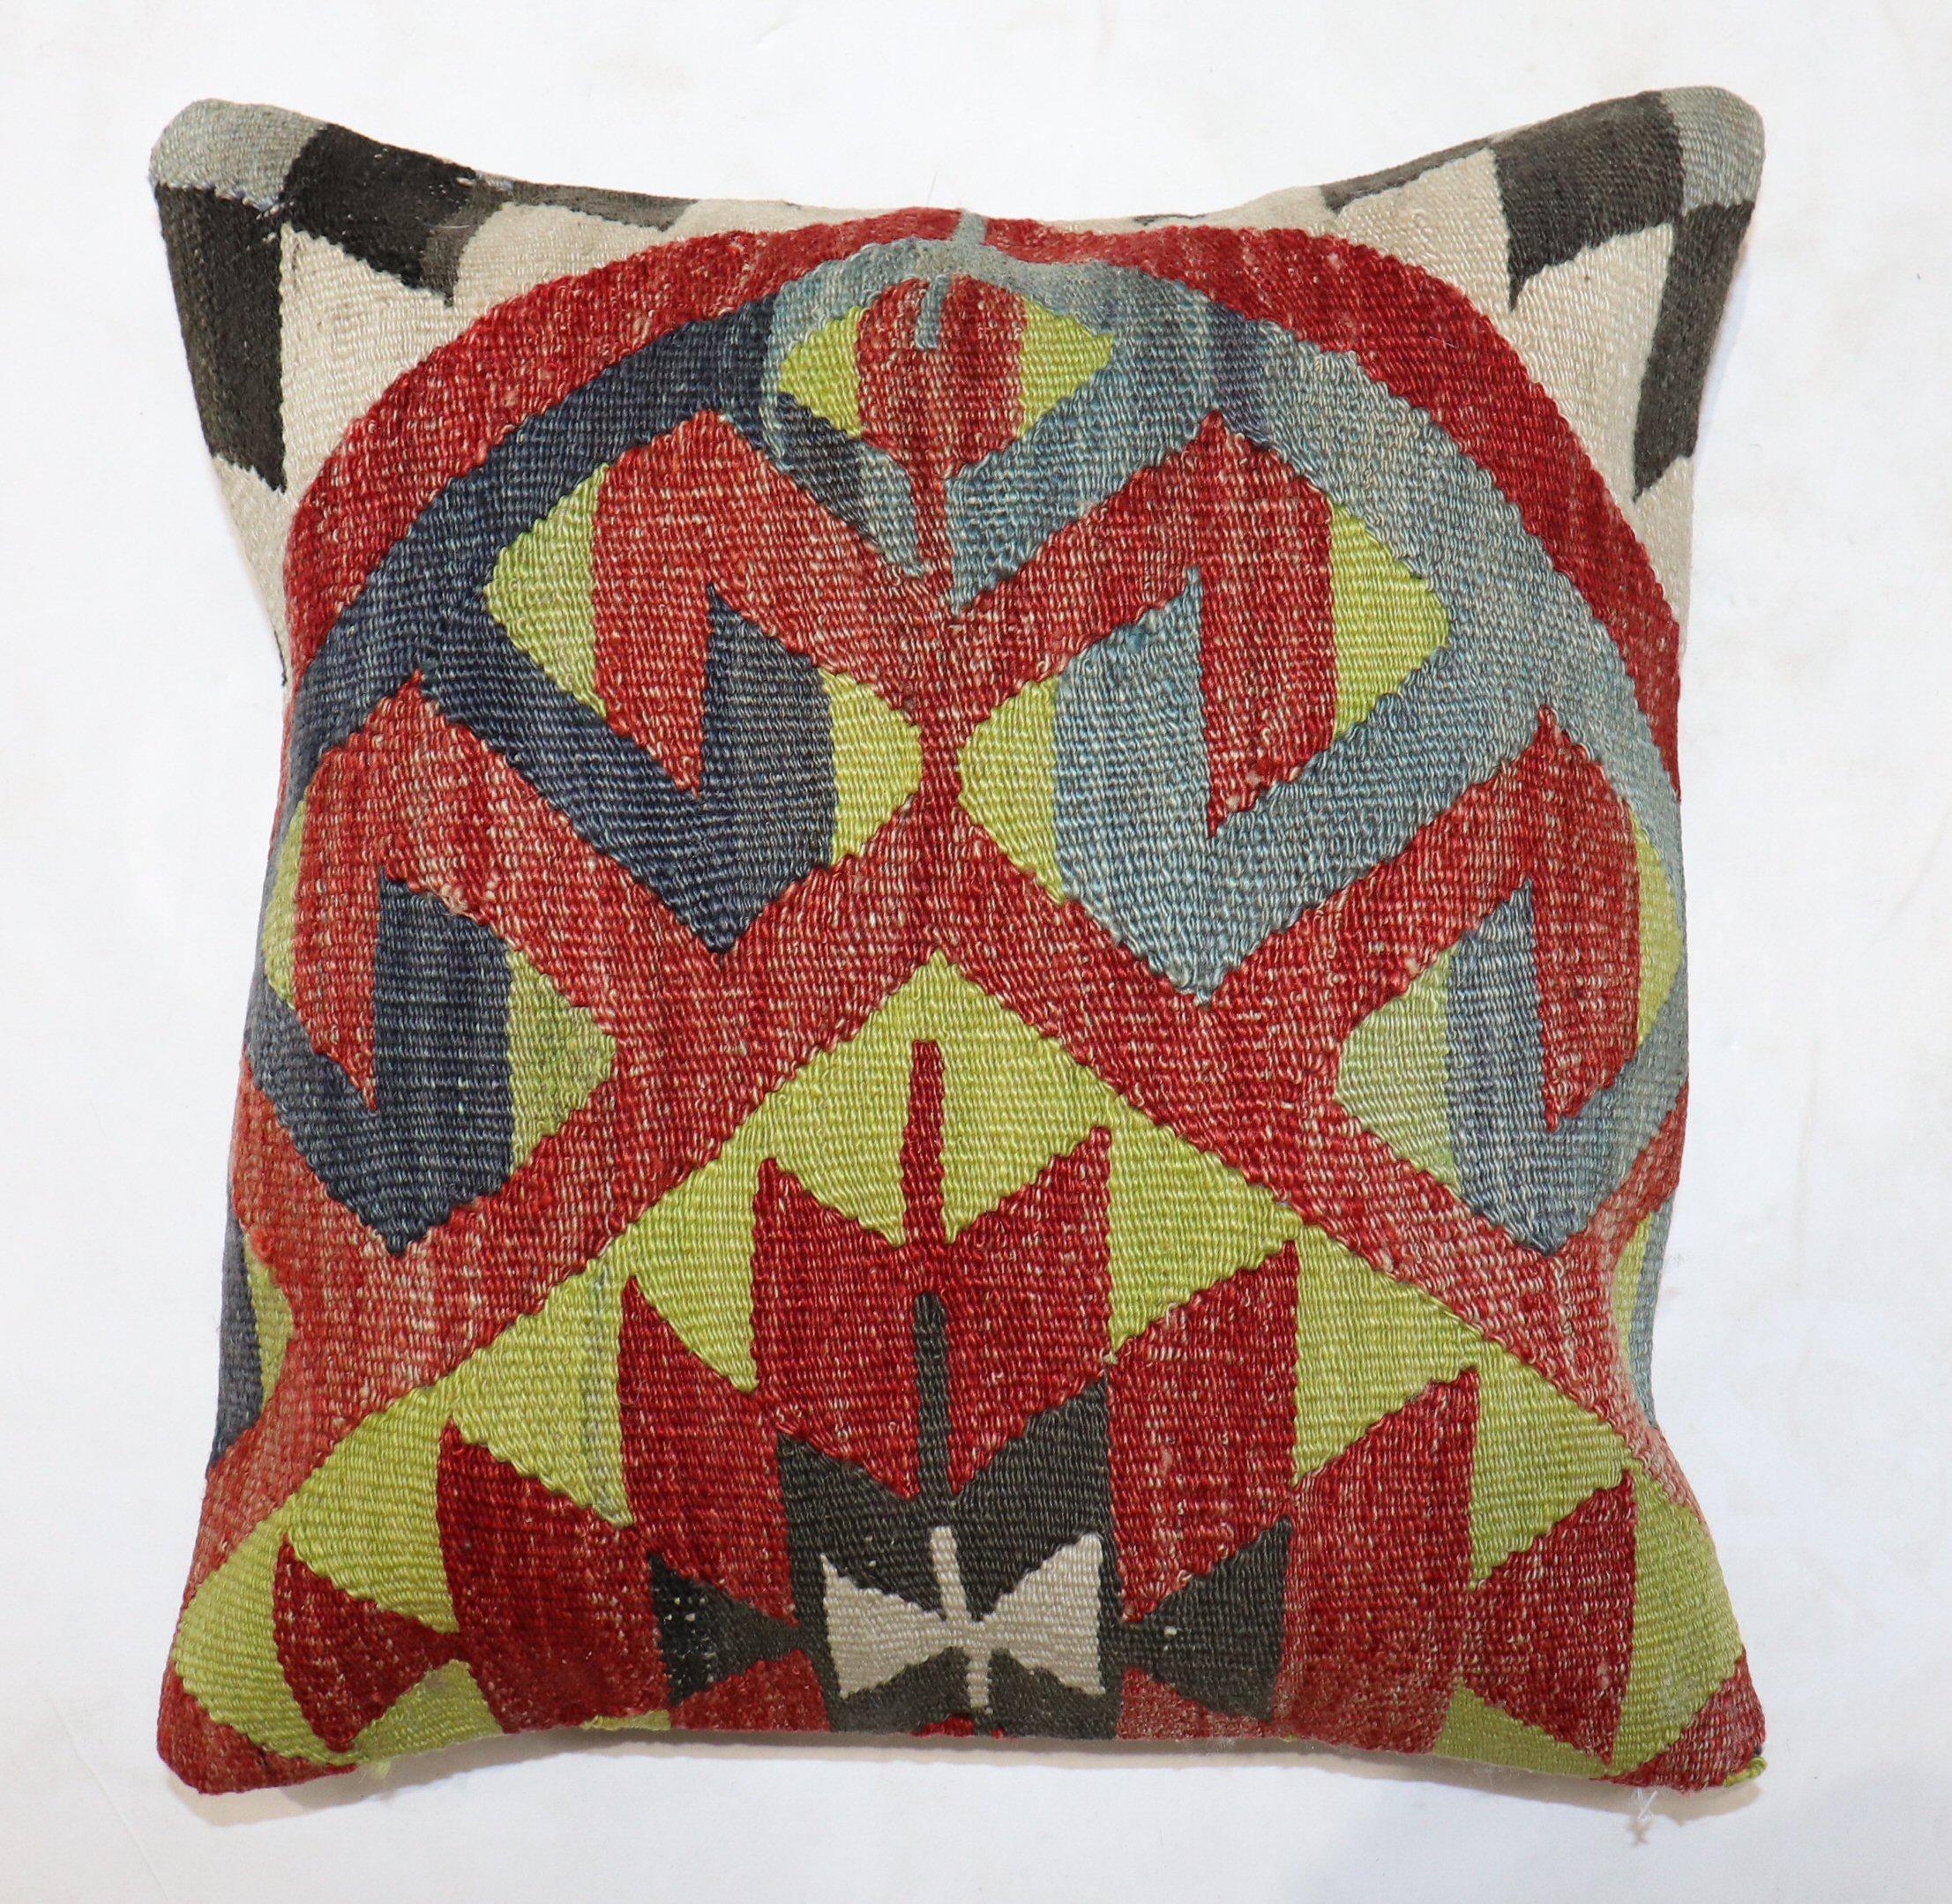 Square-size pillow made from an antique Turkish Kilim flat-weave.

Measures: 16” x 16”.